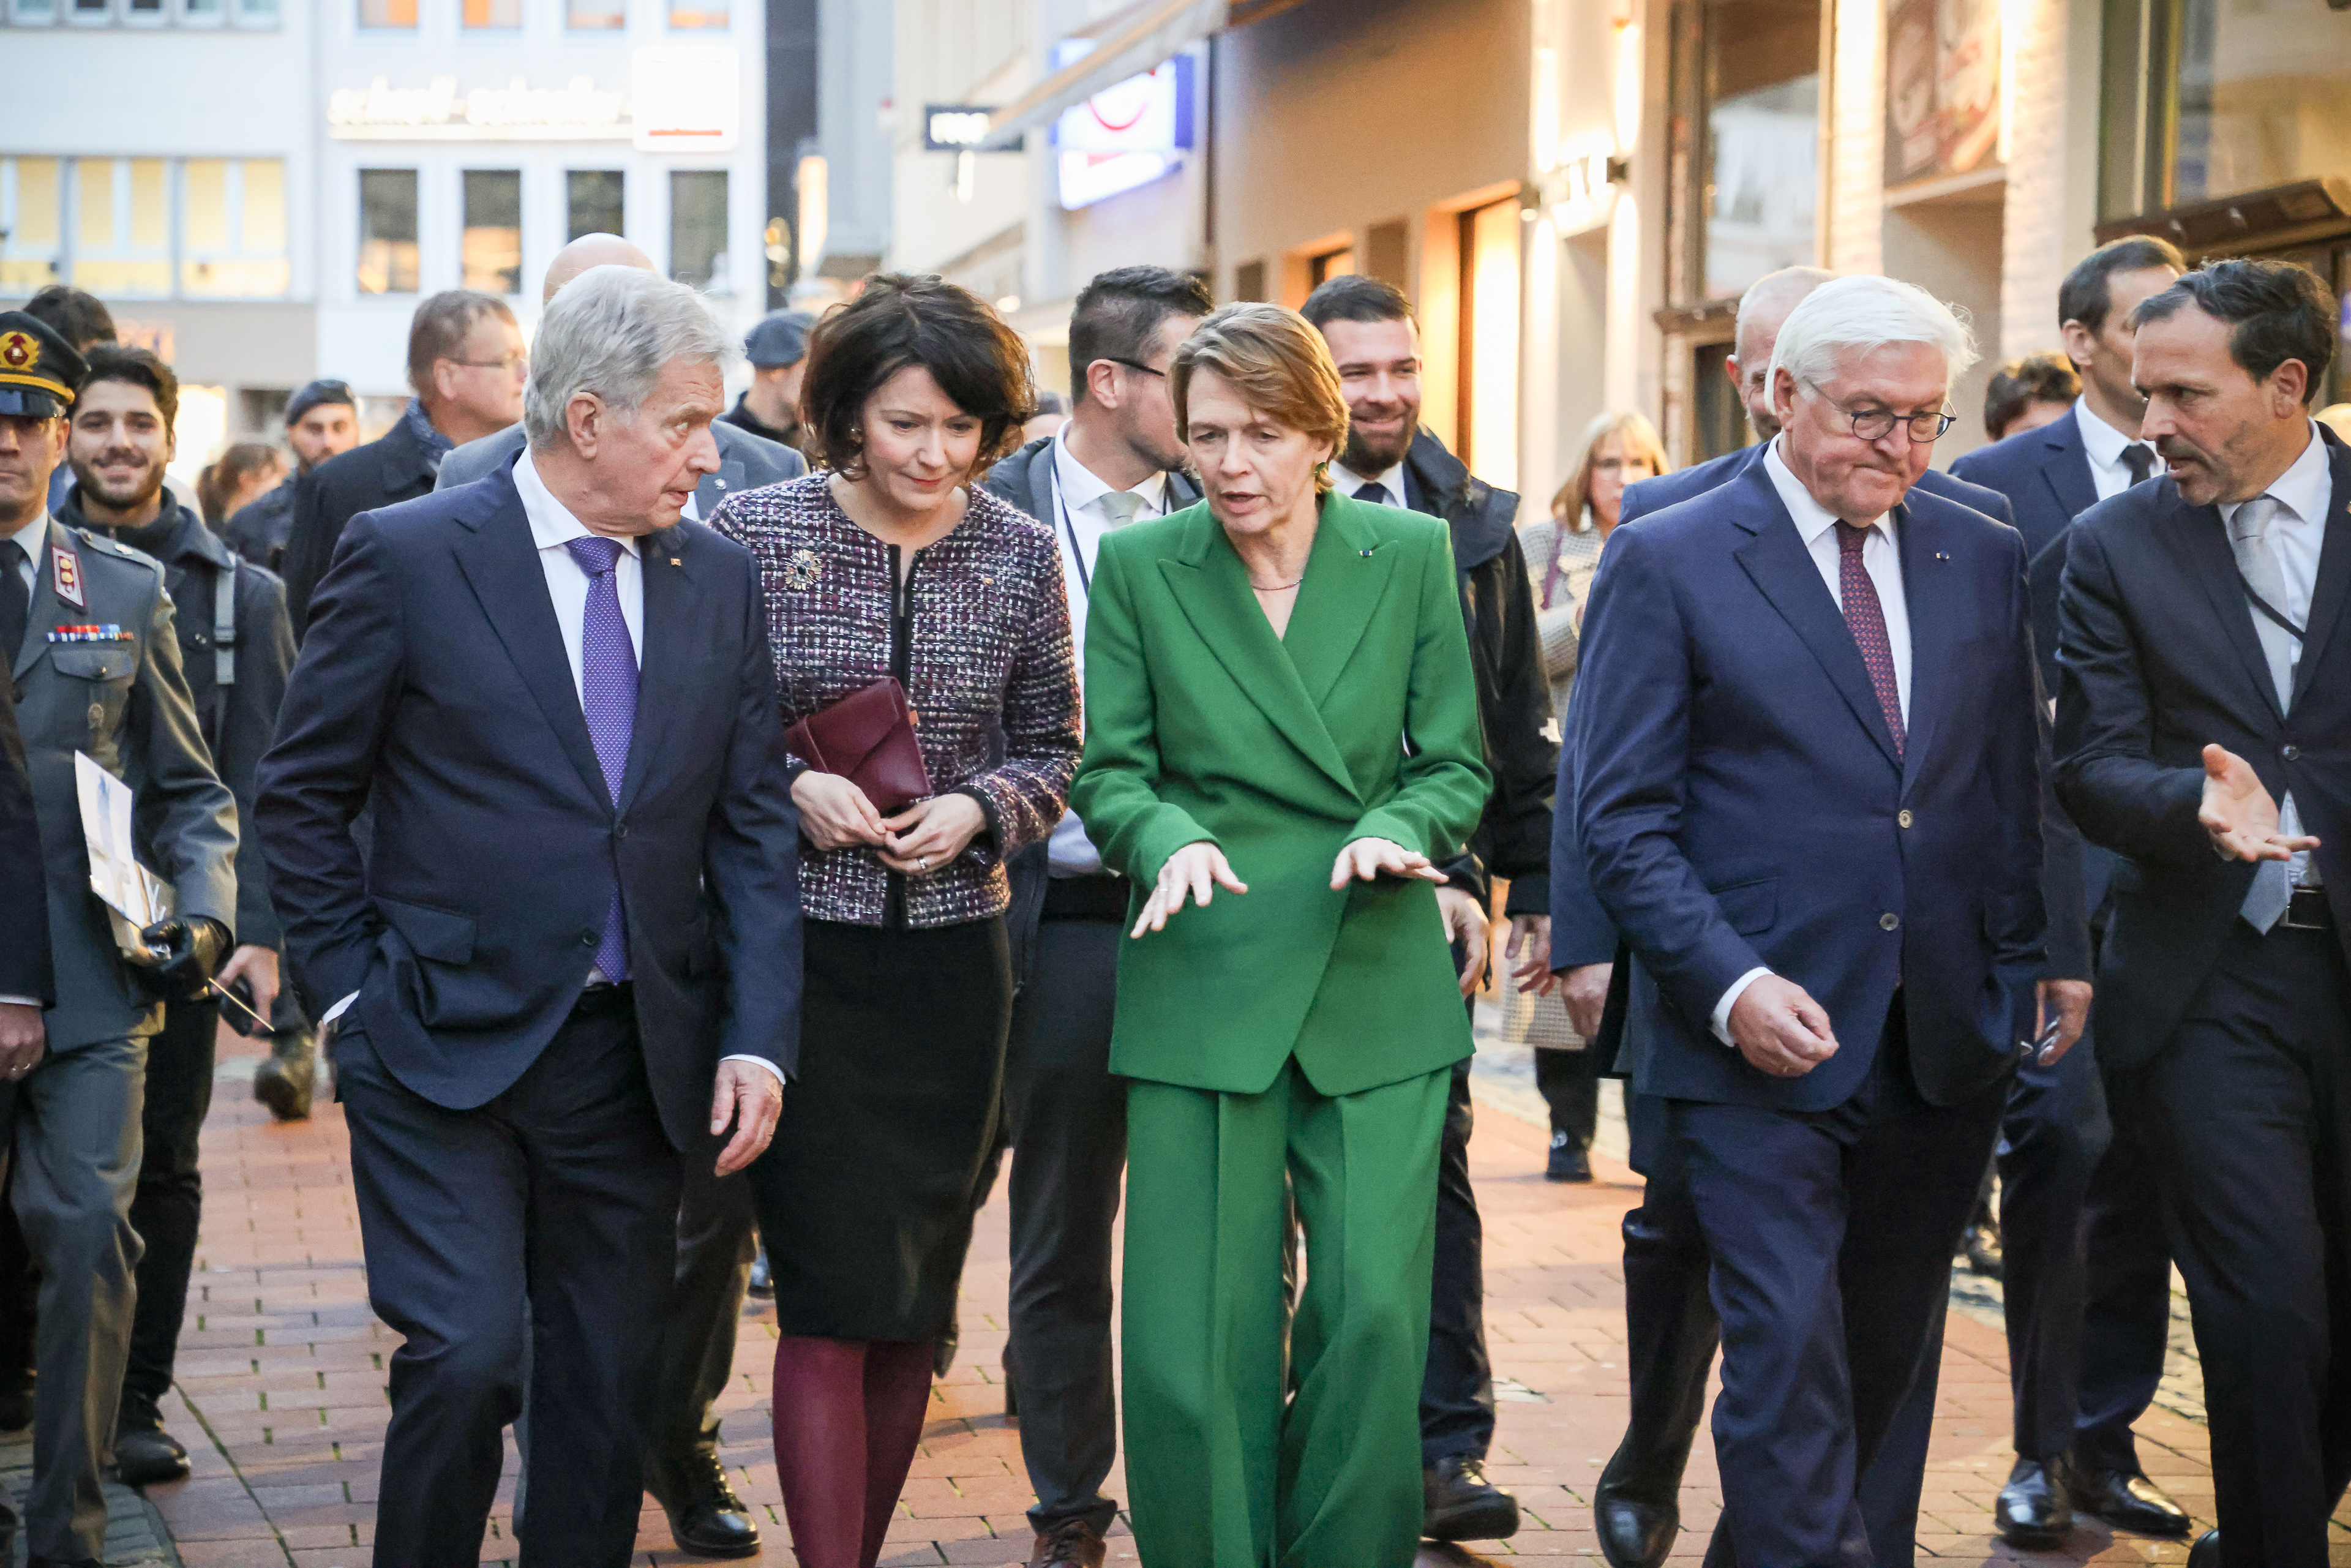 A walk in the old town of Bonn. Photo: Riikka Hietajärvi/Office of the President of the Republic of Finland